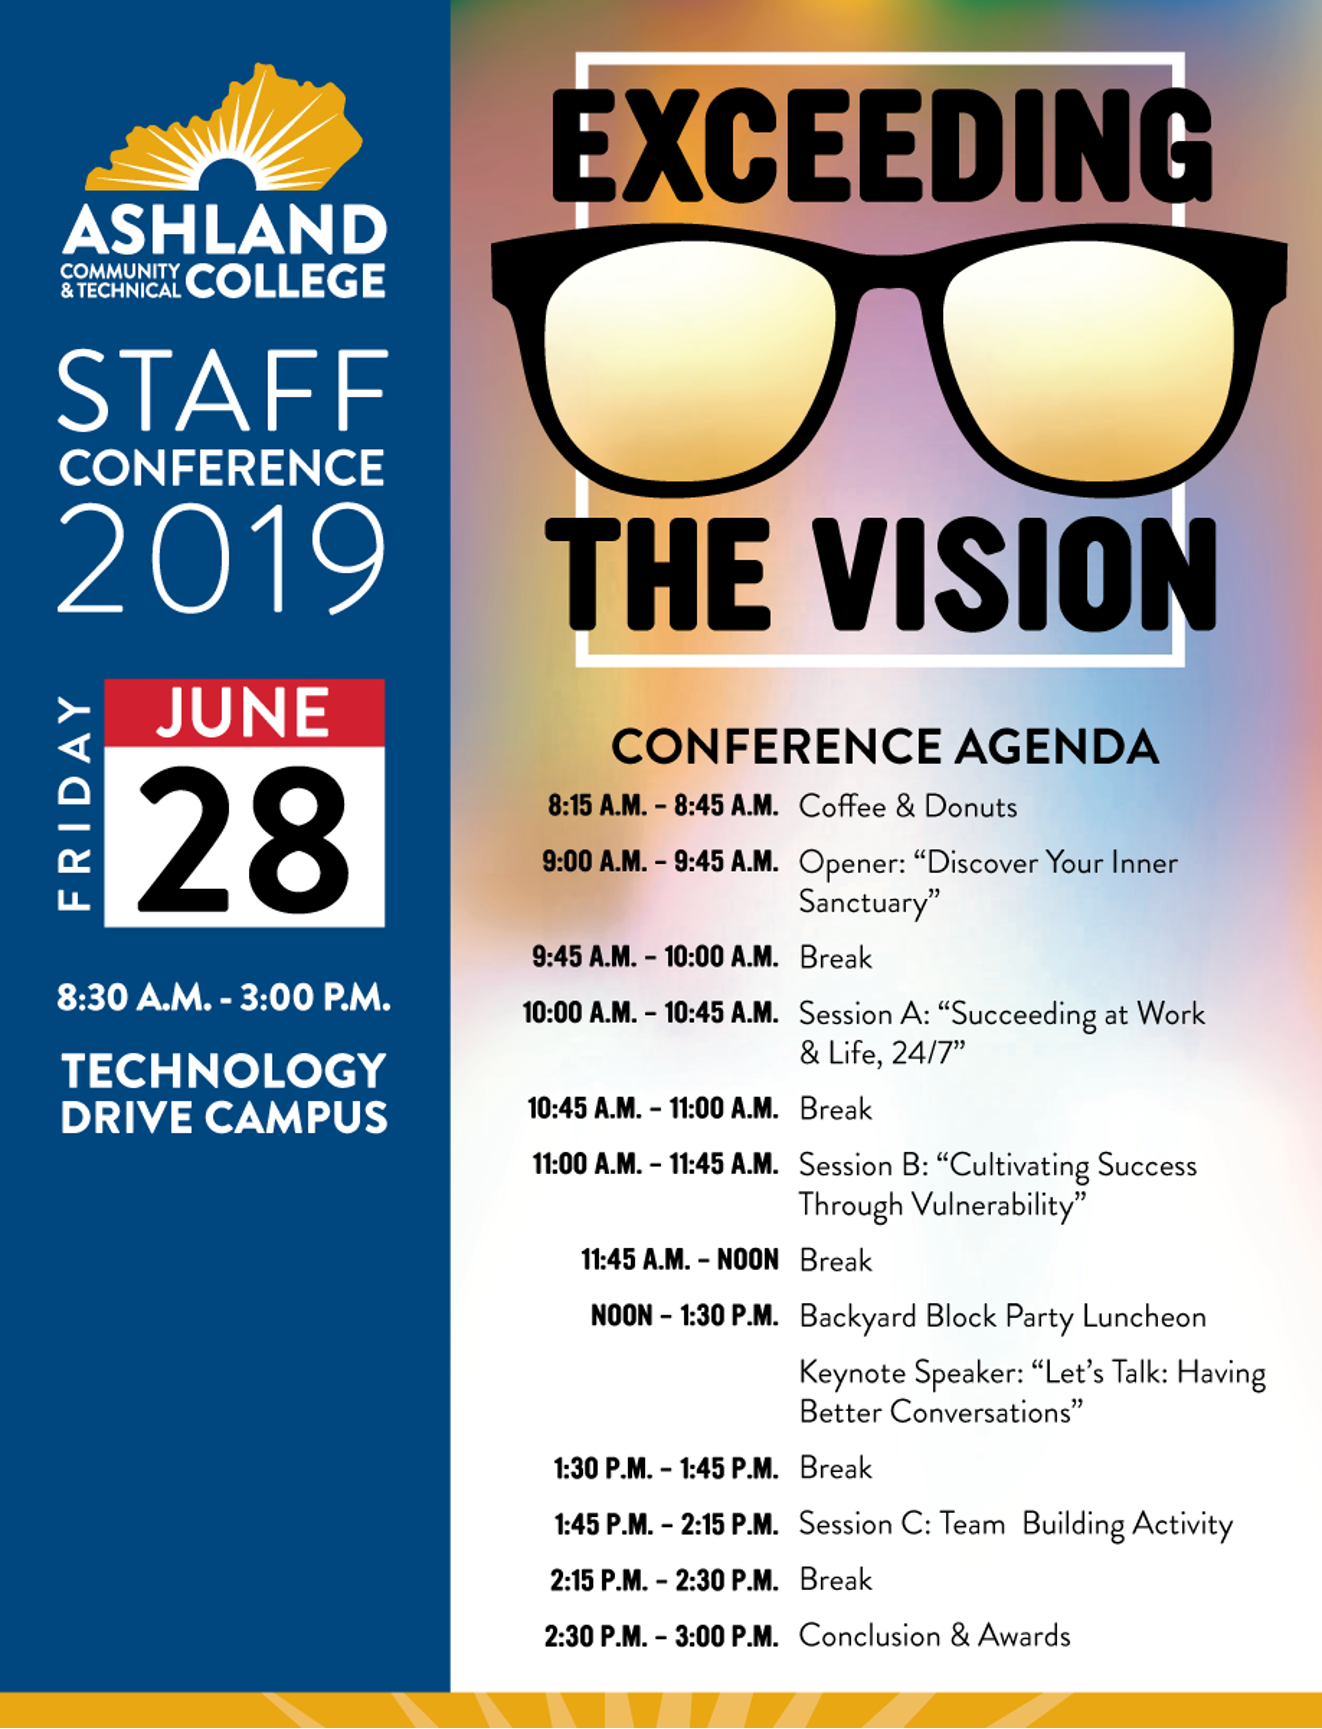 Staff Conference 2019 Exceeding the Vision. Friday June 28 8:30-3:00PM. Conference Agenda: 8:15AM - 8:45 AM - Coffee and Donuts. 9AM - 9:45AM - Opener "Discover Your Inner Sanctuary". 9:45AM - 10AM - Break. 10:00AM - 10:45Am - Session A: "Succeeding at Work and Life, 24/7". 10:45 - 11AM Break. 11AM - 11:45AM Session B: "Cultivating Success Through Vulnerability". 11:45 - Noon Break. Noon - 1:30PM Backyard Block Party Luncheon, Keynote Speker: "Let's talk: Having Better Conversations". 1:30-1:45PM Break. 1:45-2:15PM Session C: Team Building Activity. 2:15-2:30PM Break. 2:30PM - 3:00PM Conclusion and Awards